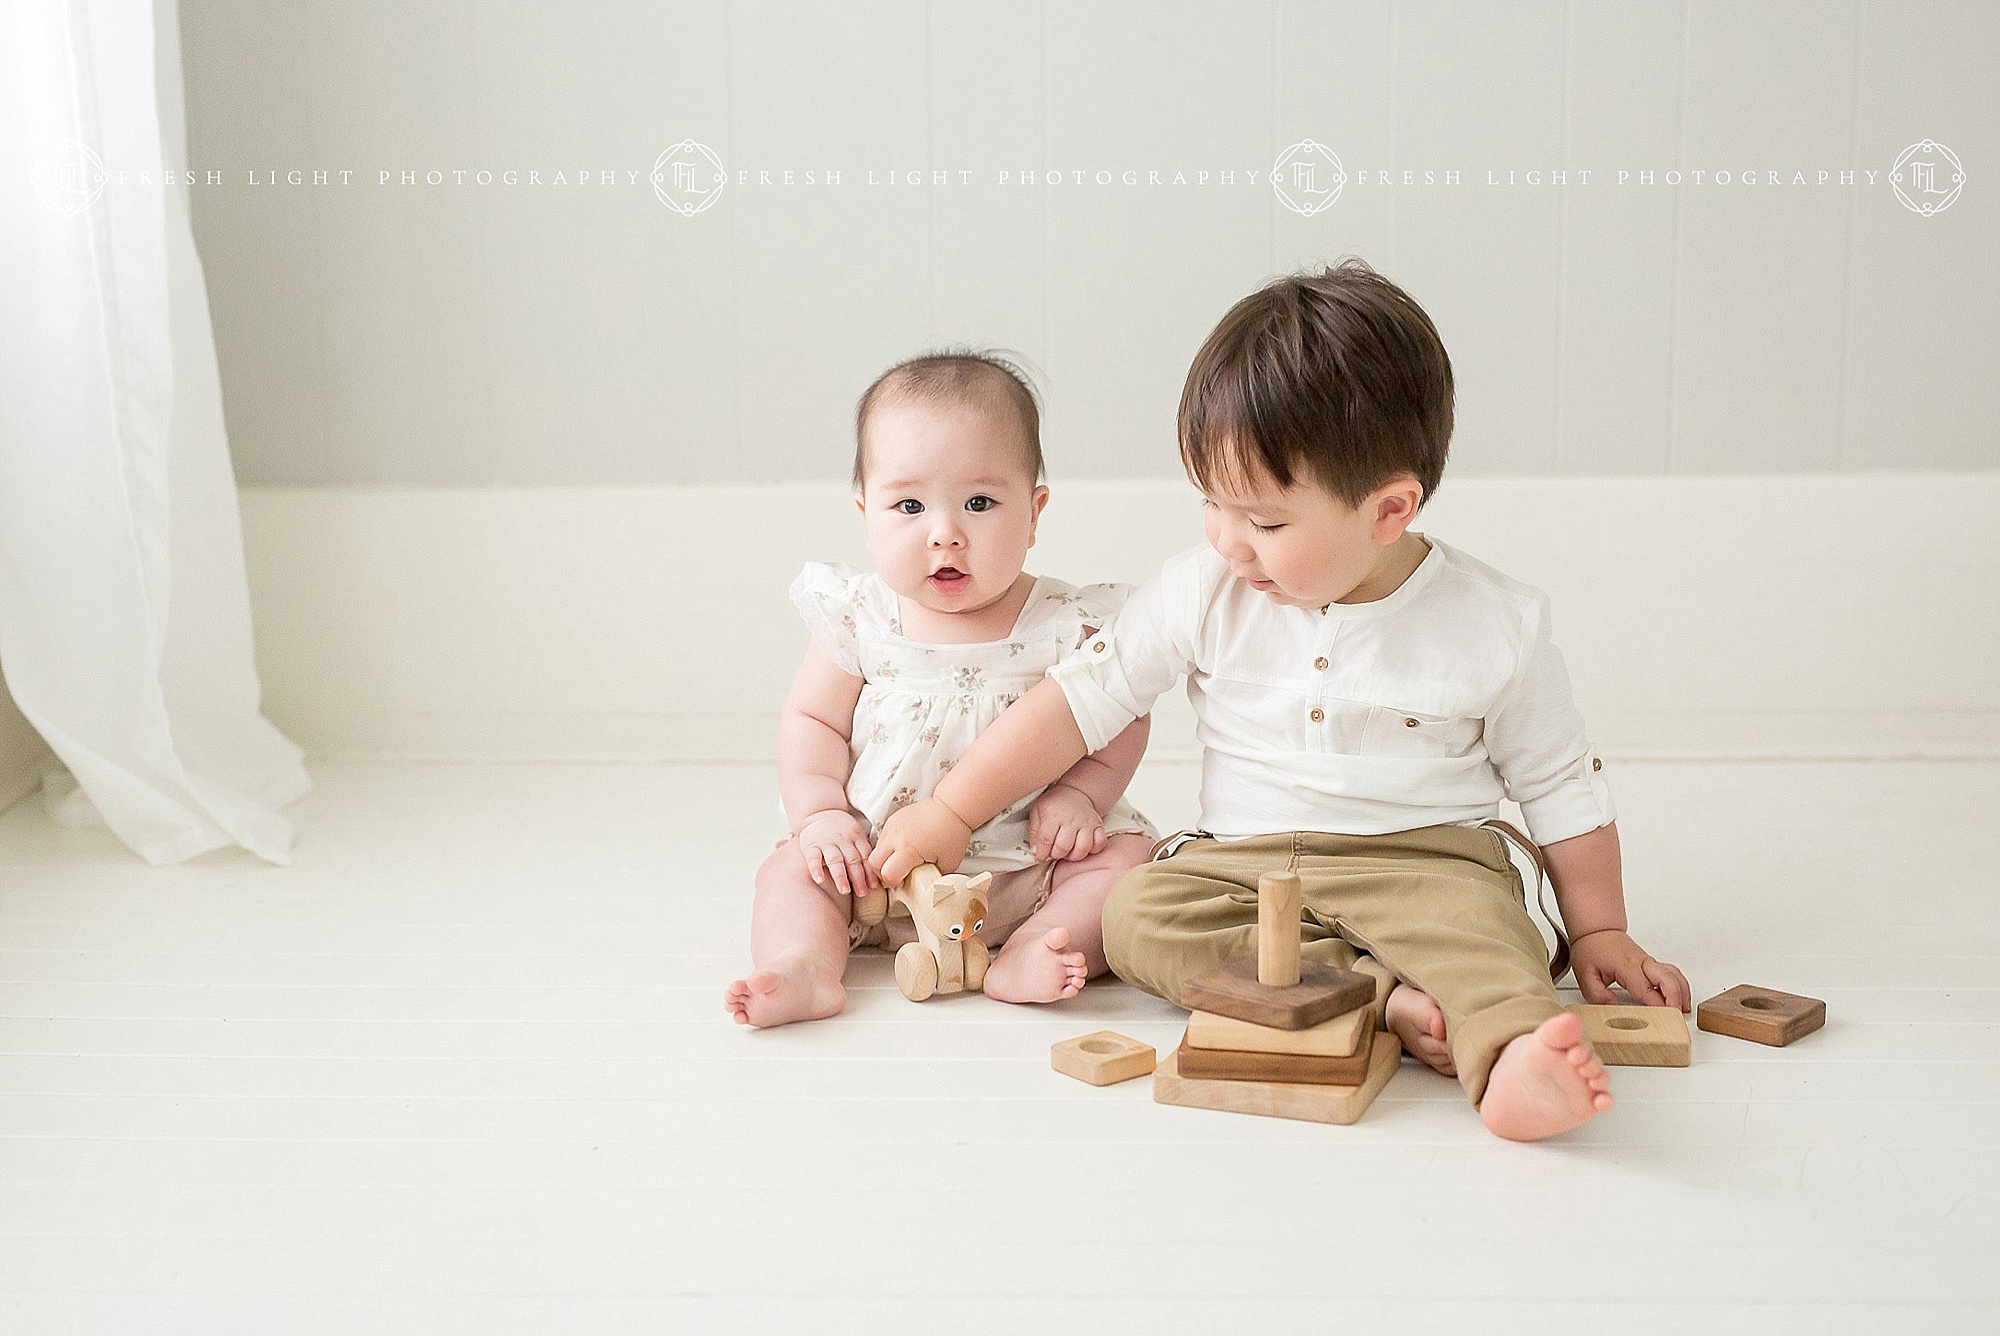 Children playing with toys in Houston Photography Studio